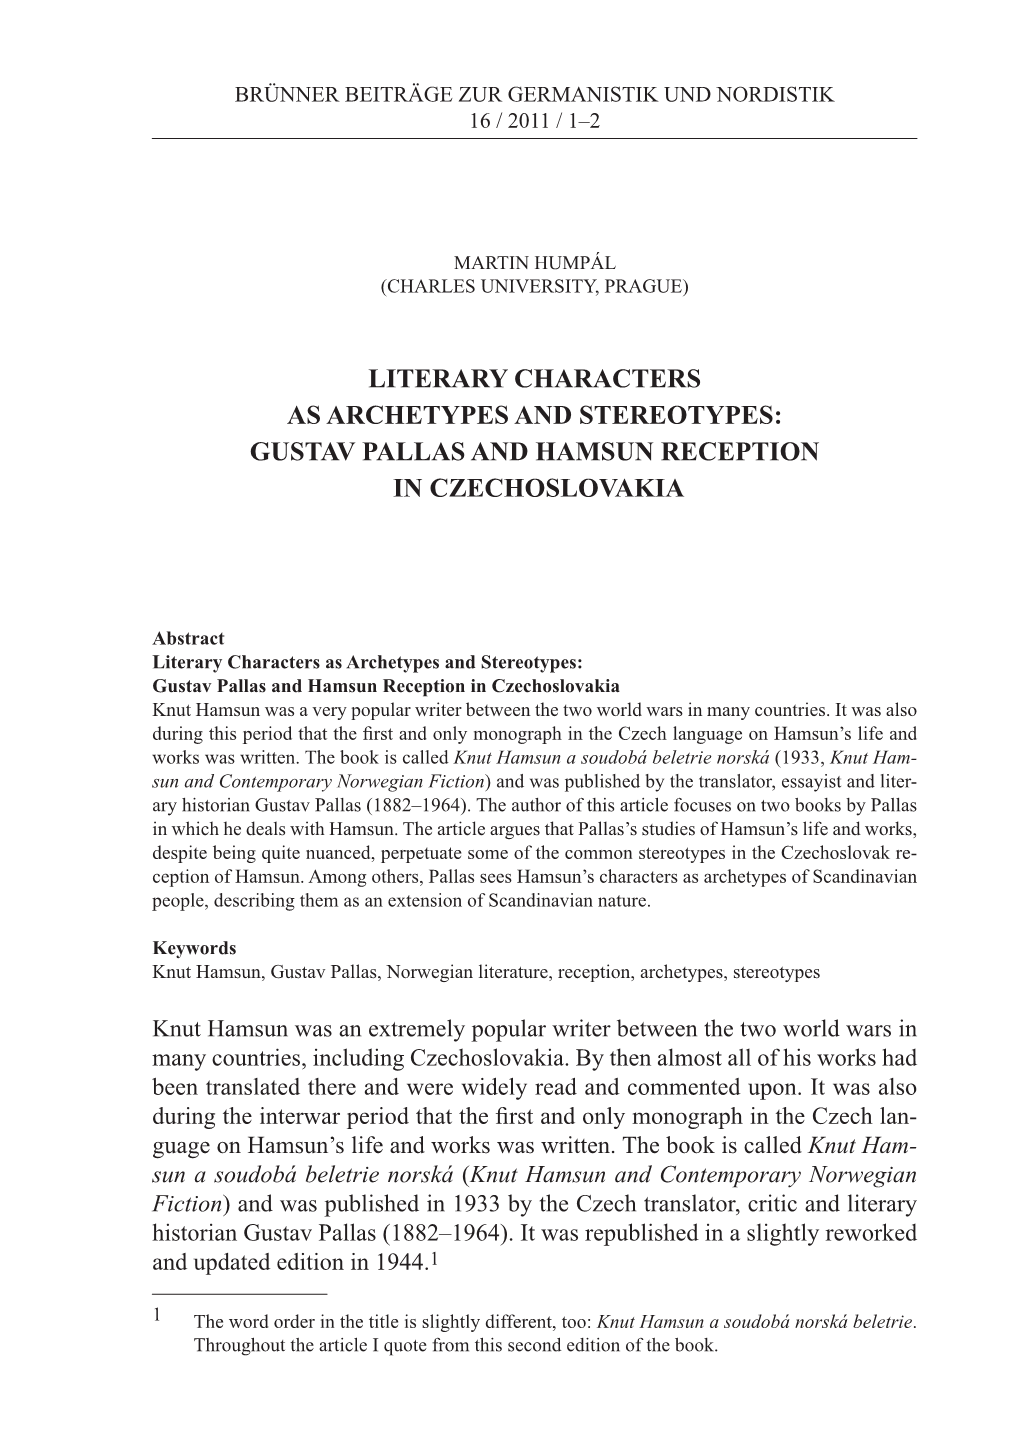 Literary Characters As Archetypes and Stereotypes: Gustav Pallas and Hamsun Reception in Czechoslovakia